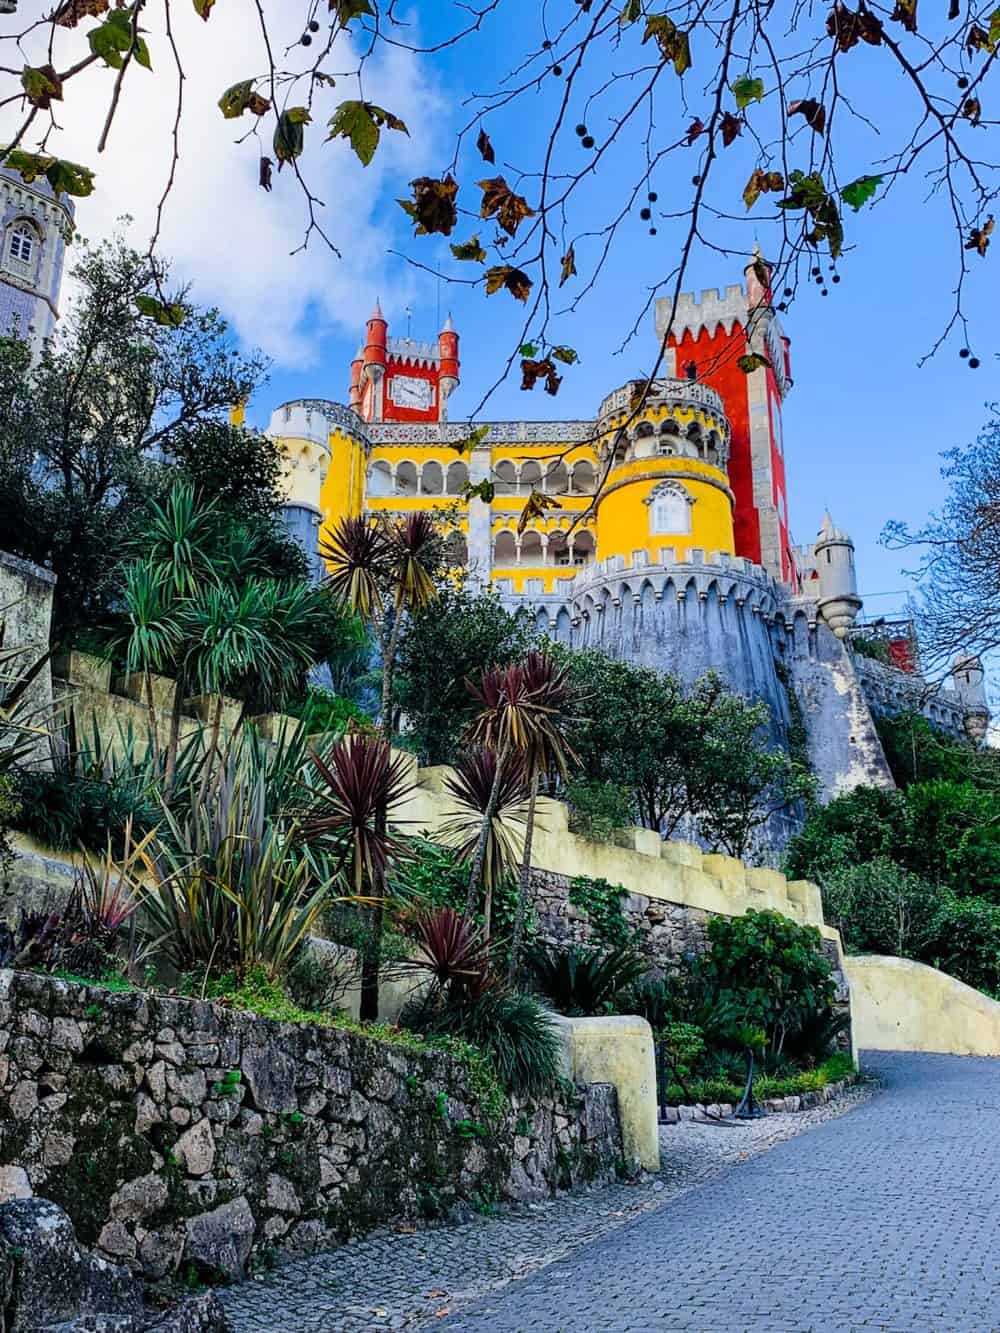 Part of the path leading up the Pena Palace Portugal